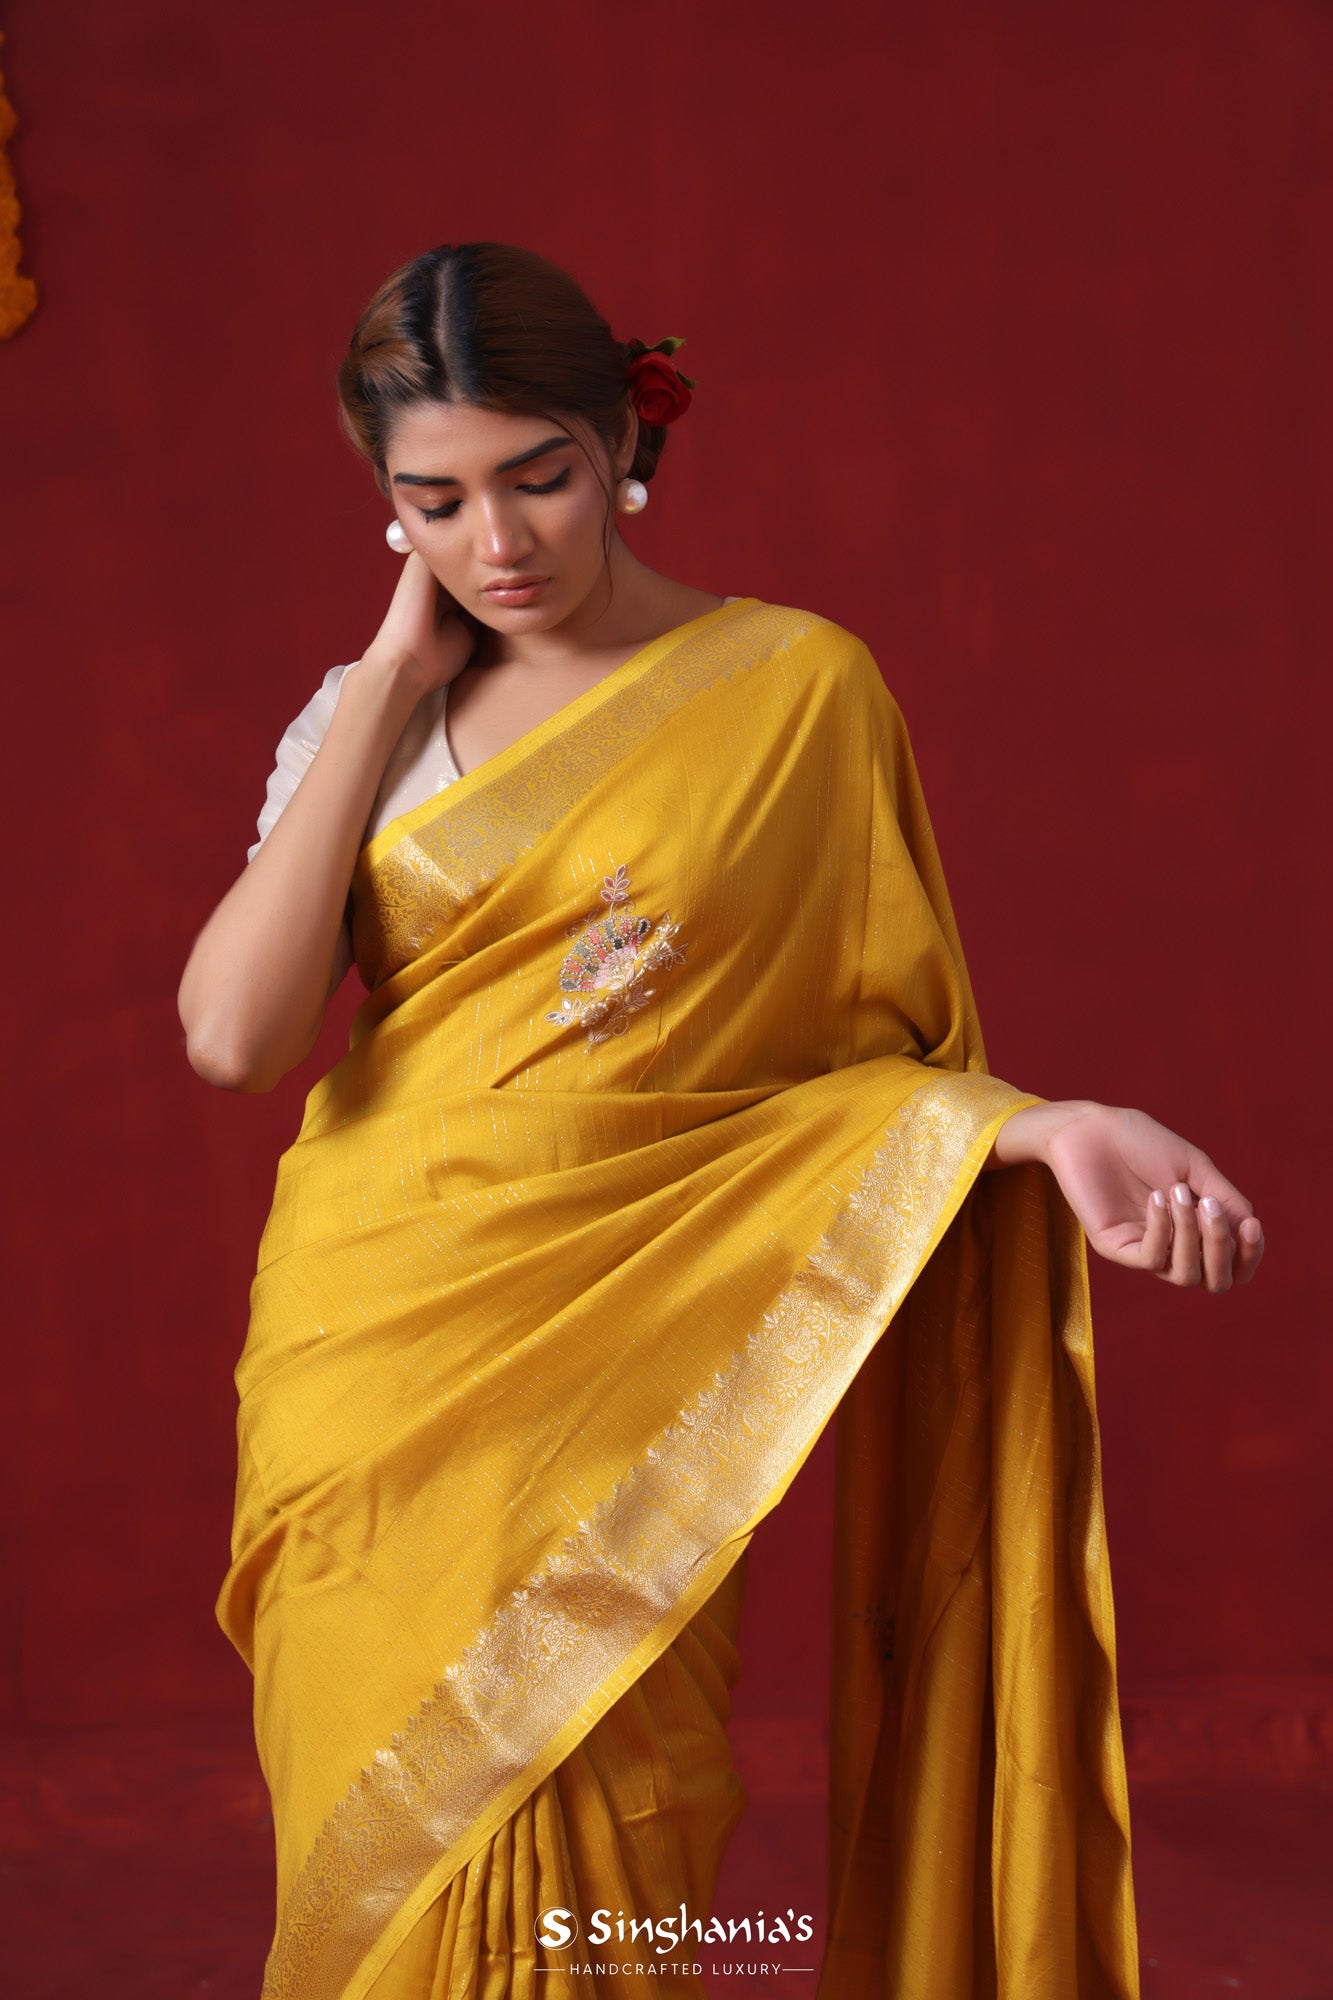 sunaina khera yellow saree for haldi for bride | Haldi ceremony outfit,  Indian dresses traditional, Indian bridal outfits